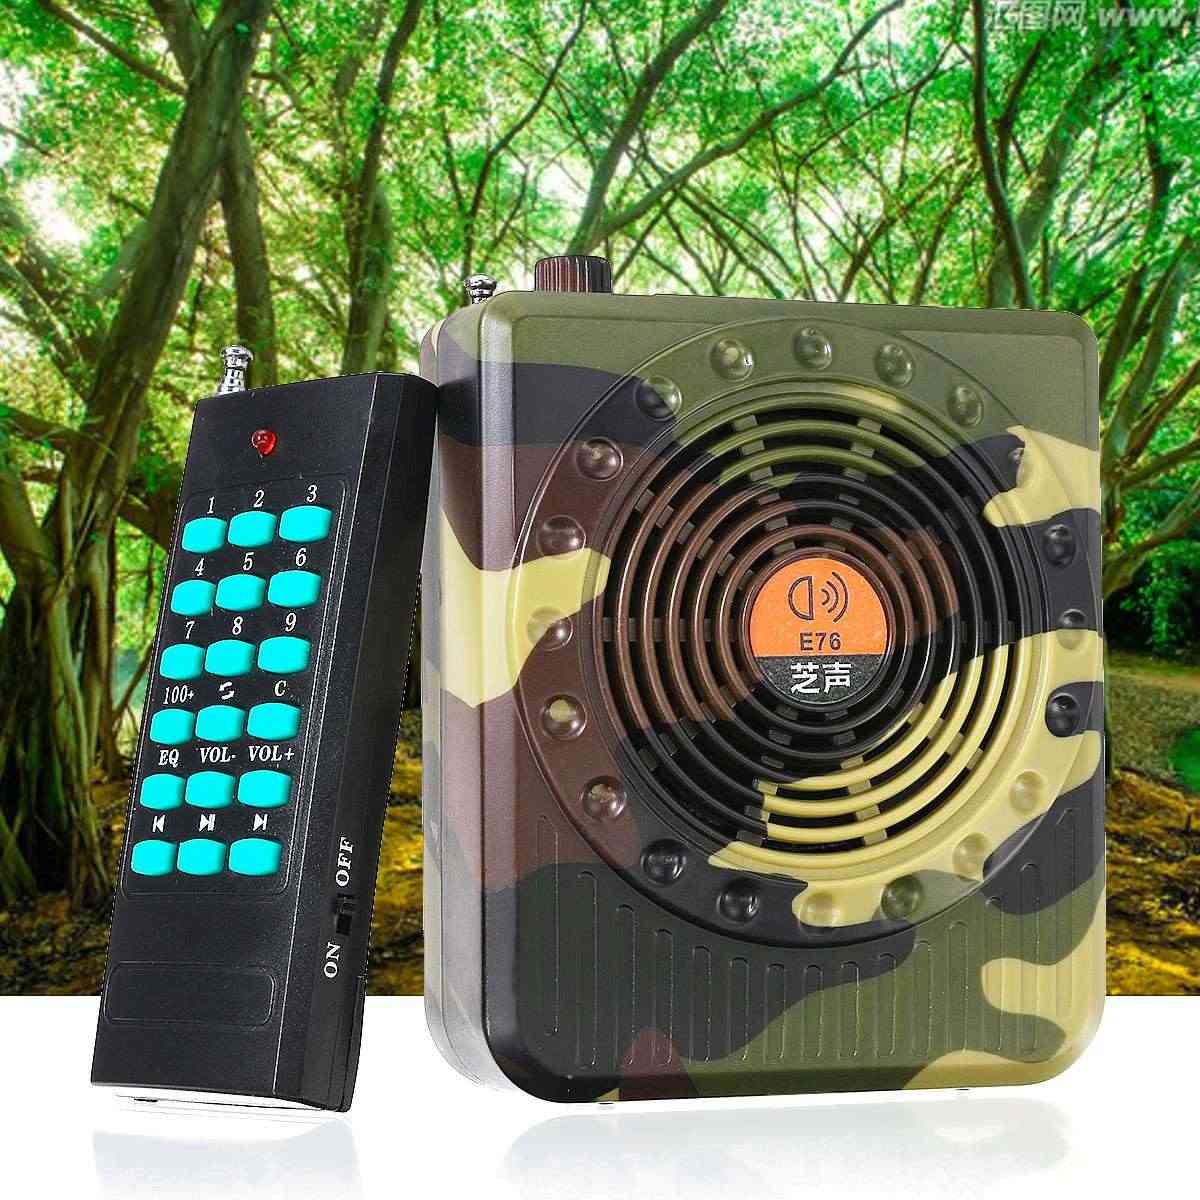 Camouflage Remote Control Bird Caller Speaker For Hunting & Fm Radio Mp3 Player